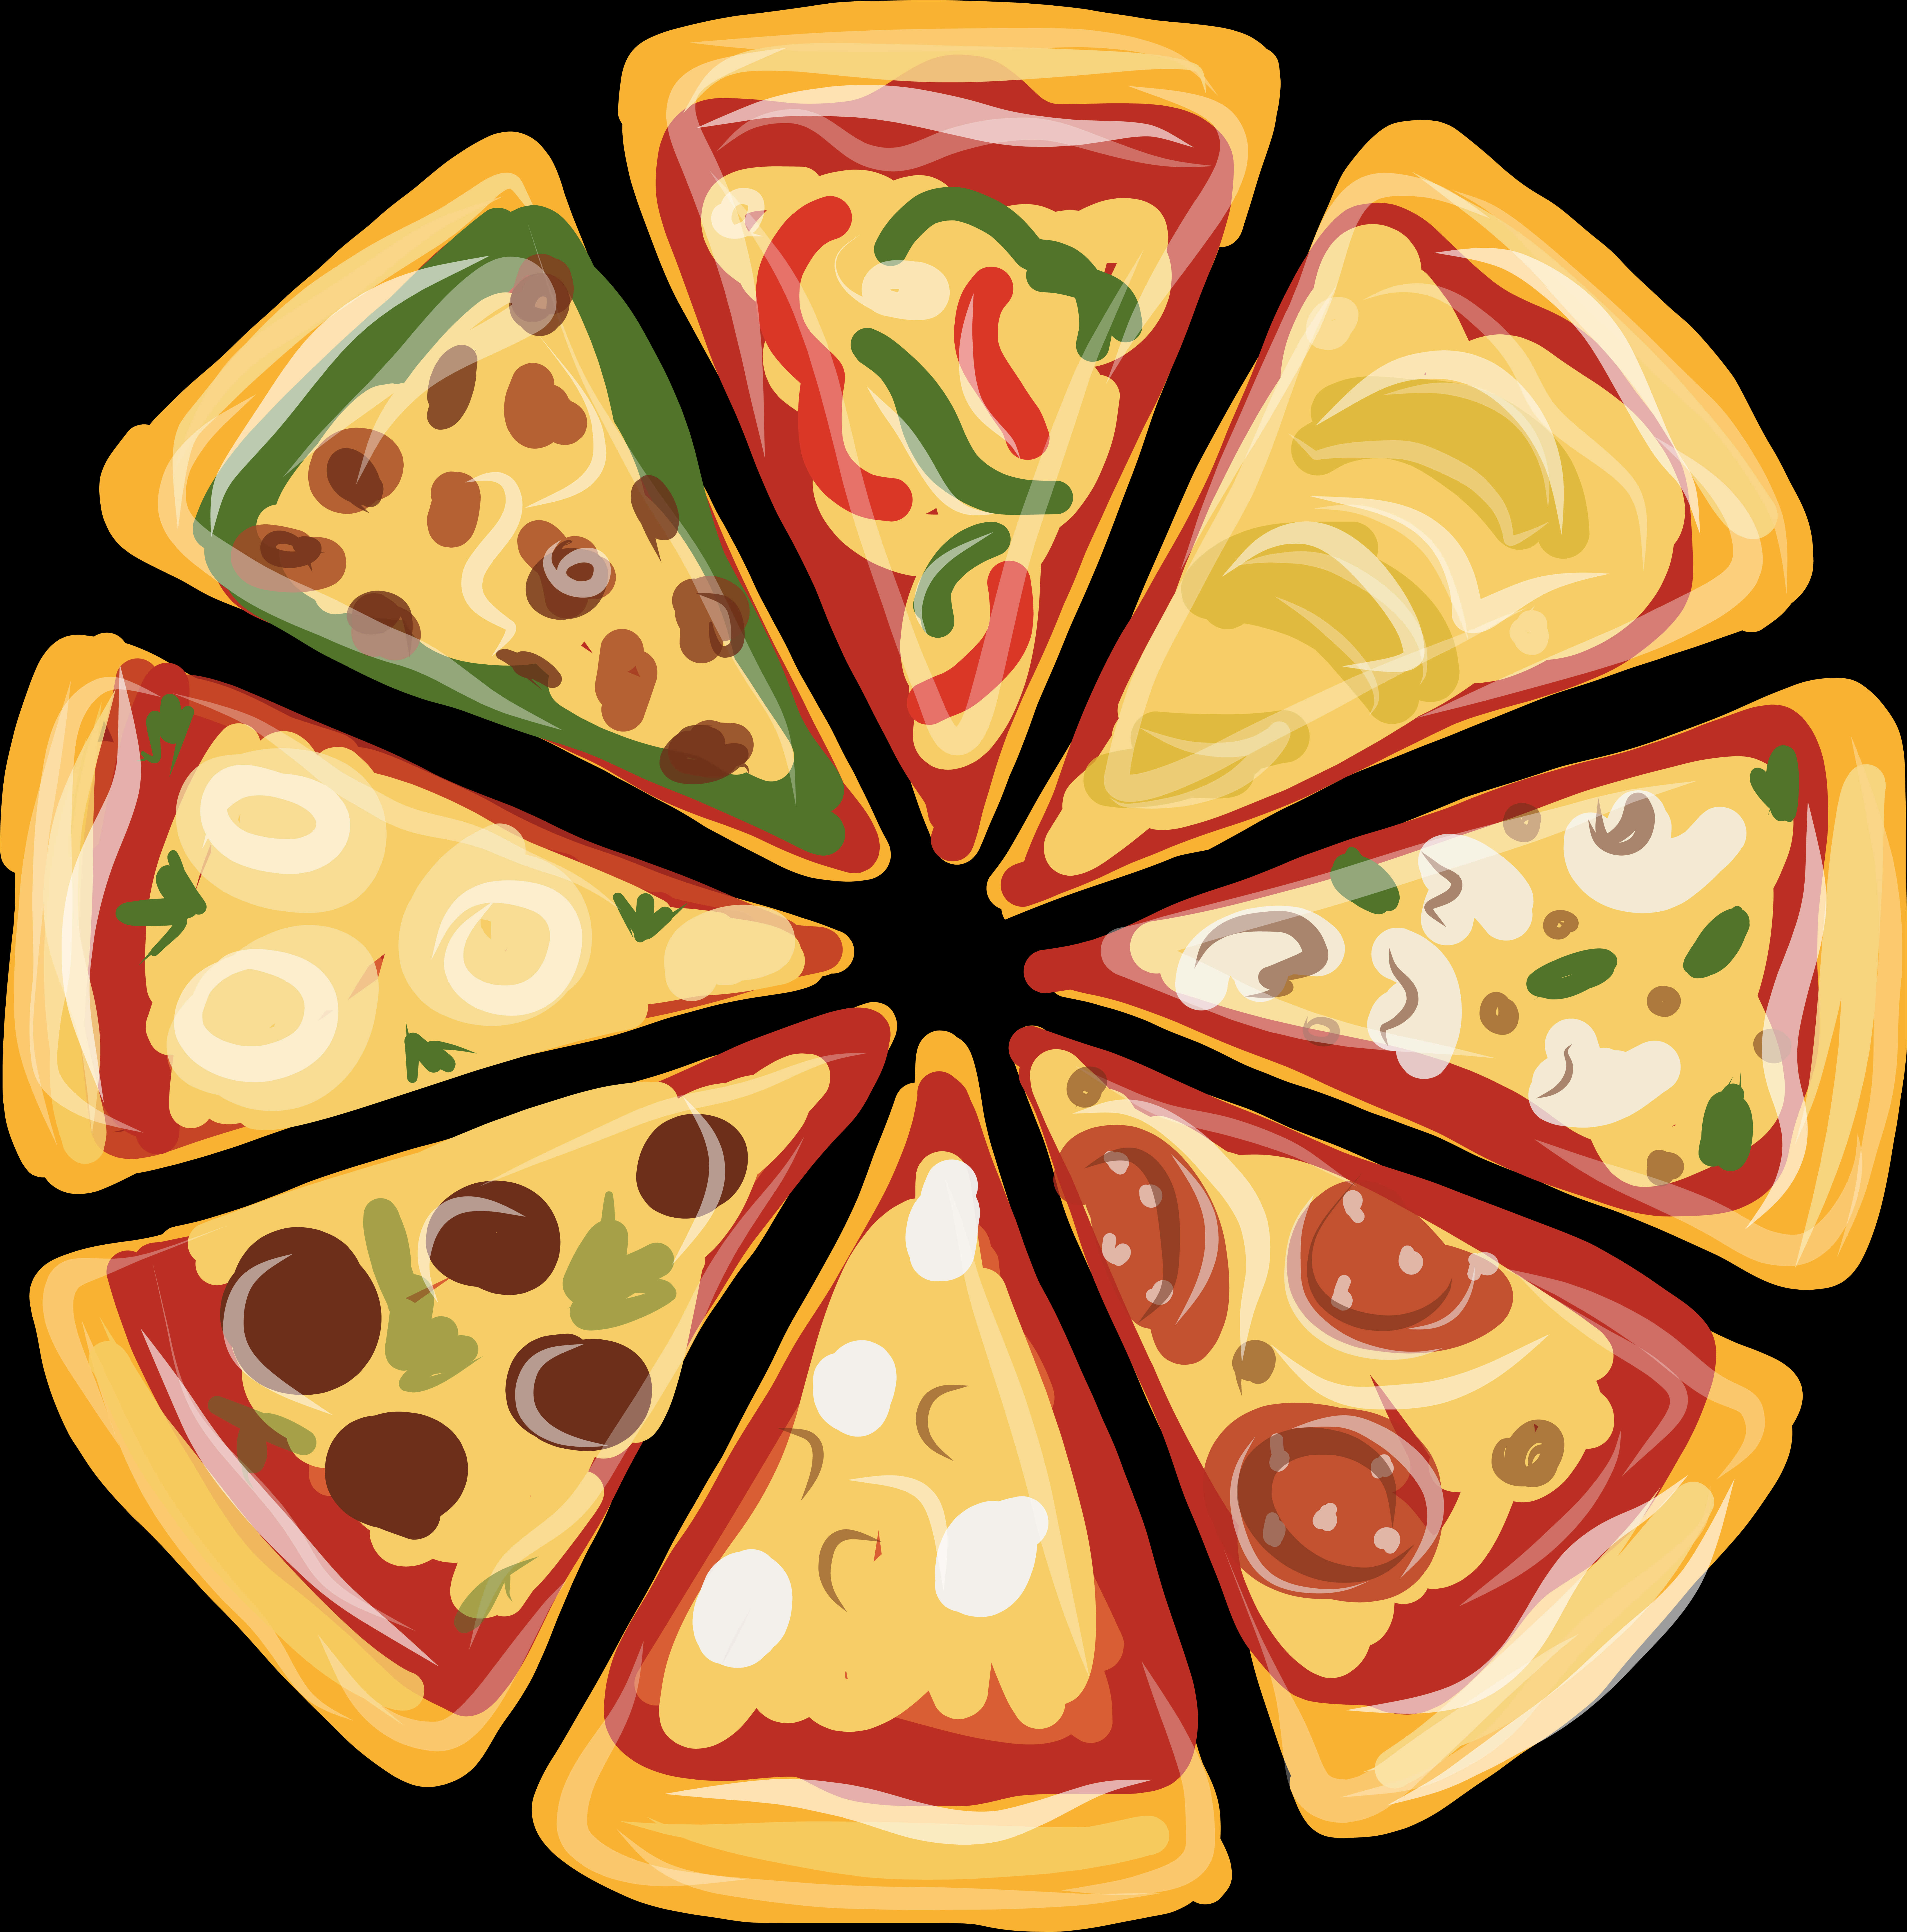 Different-flavored Pizza Slices